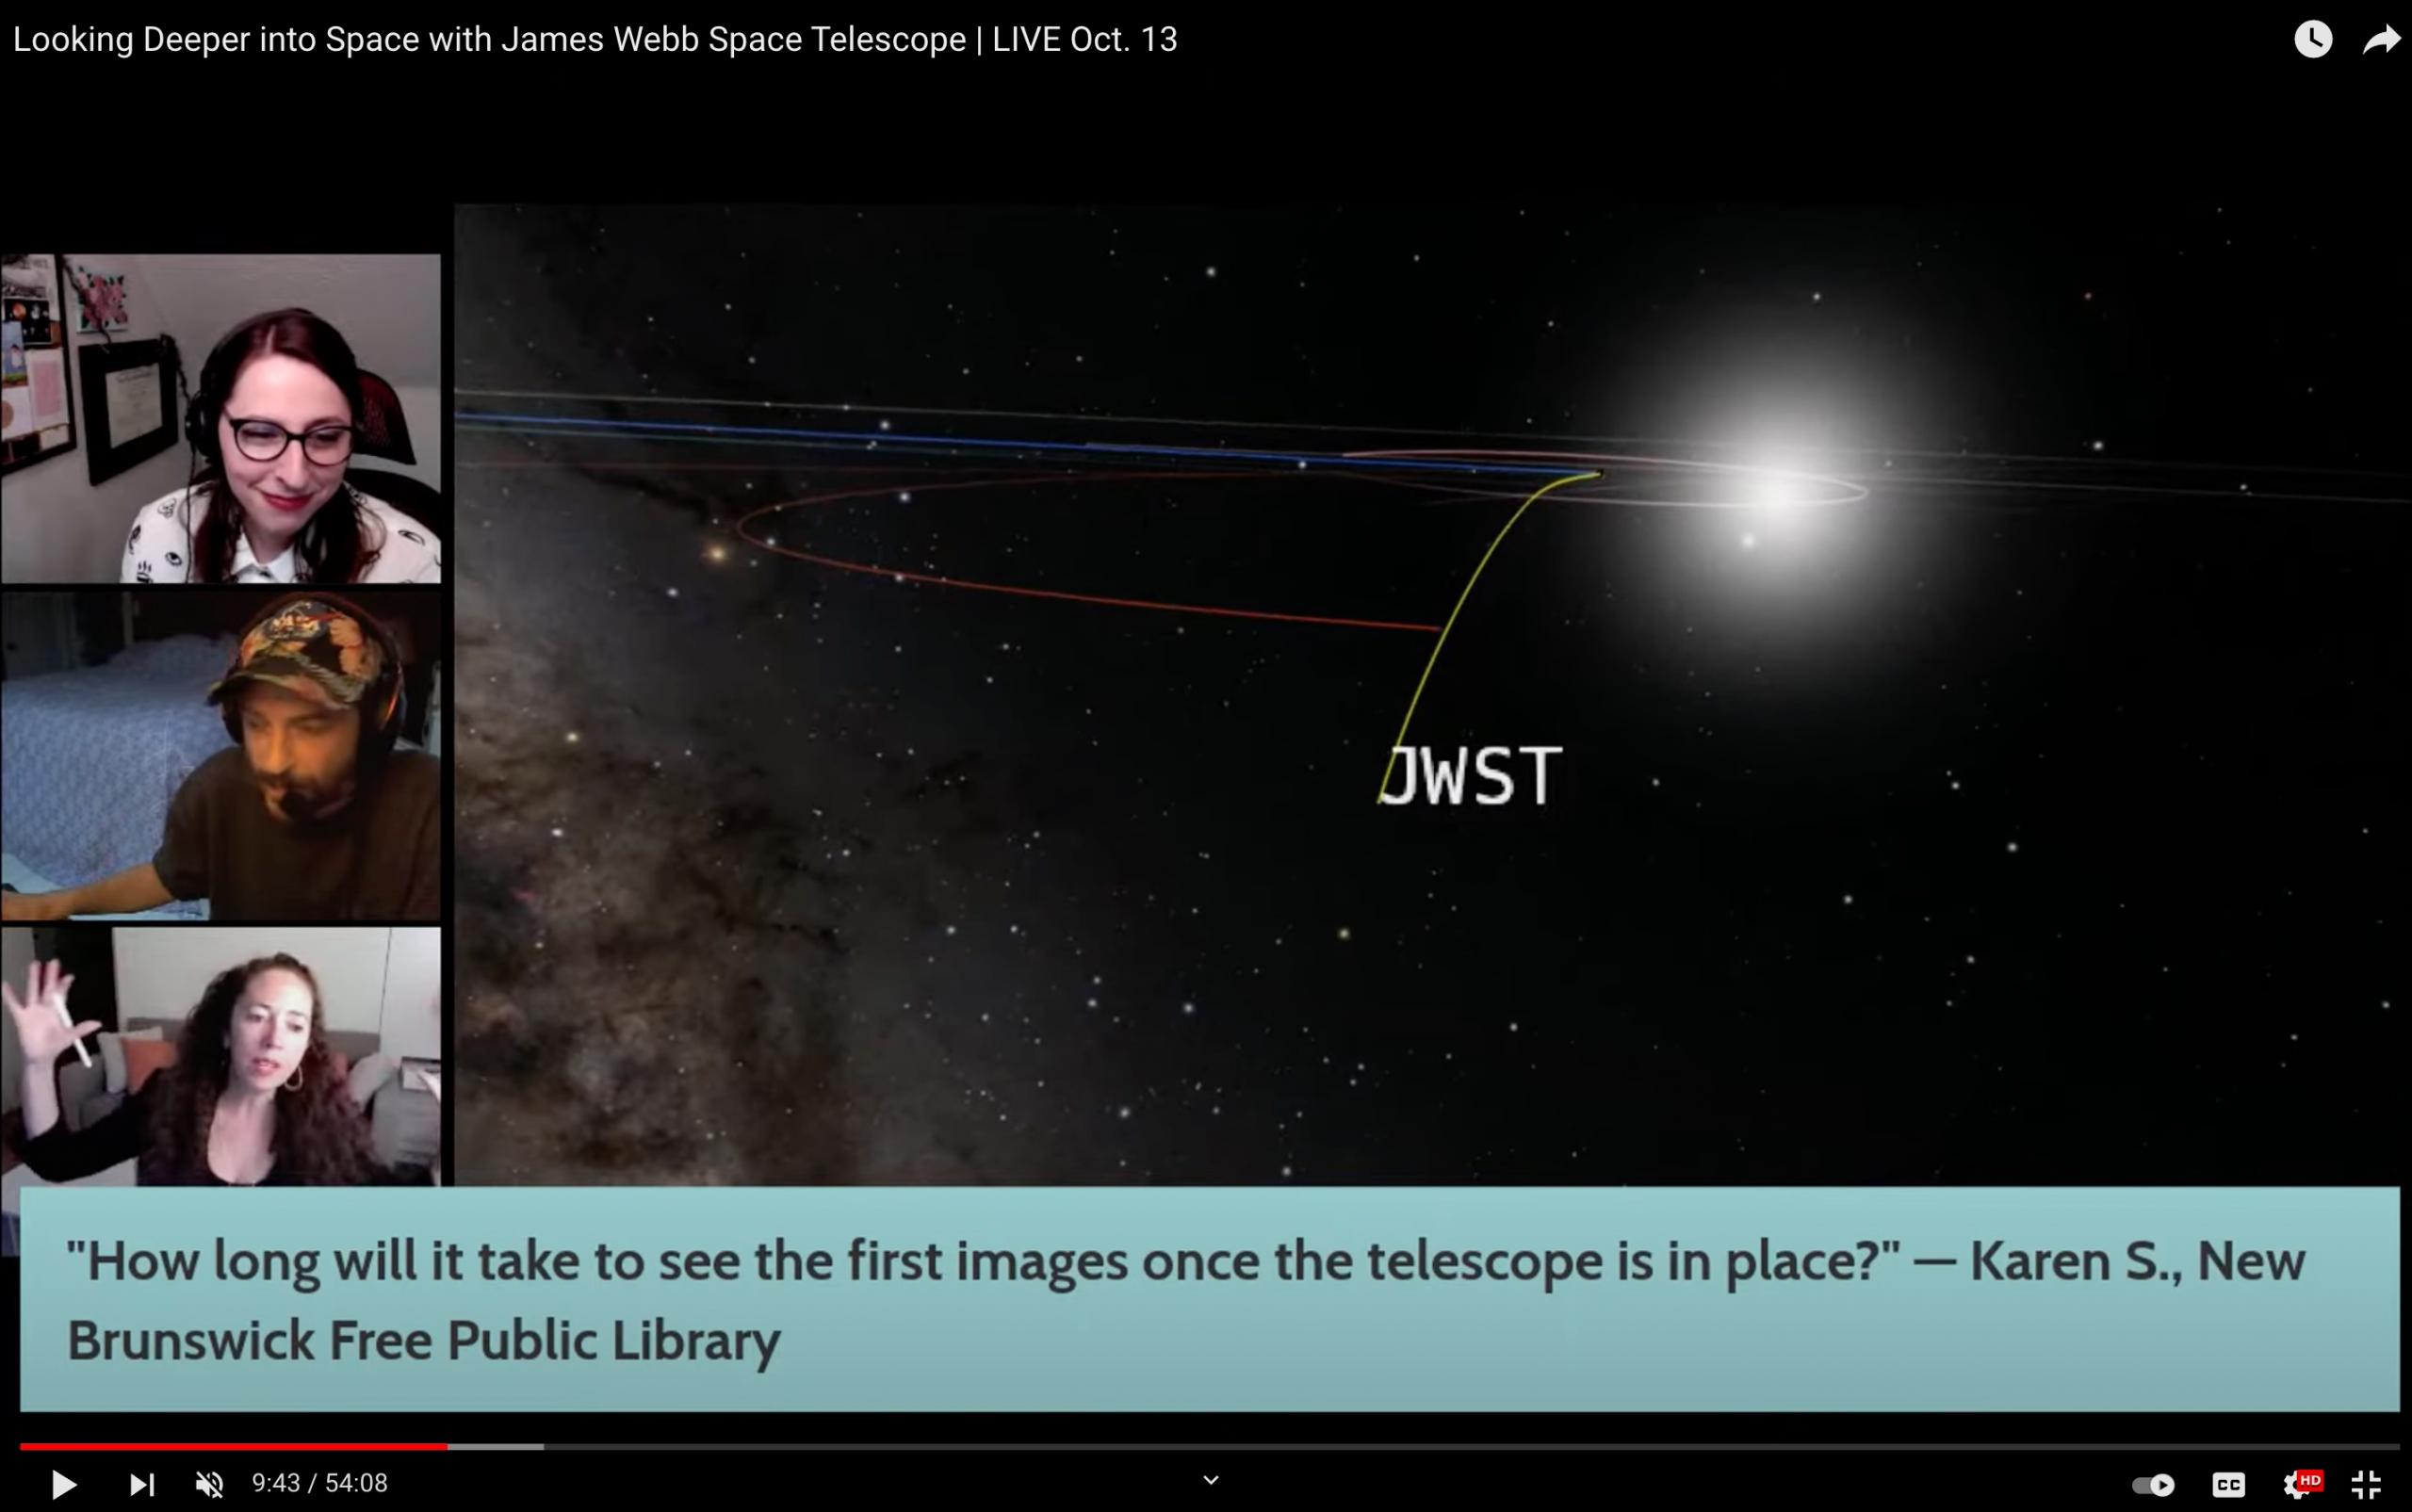 Livestream of three people from the American Museum of Natural History to the left of an image by OpenSpace software showing the estimated location of the James Webb Space Telescope. Dr. Jackie Faherty is explaining Webb, while Corrie Roe, Project Coordinator, and Micah Acinapura, Software Integration Engineer are listening.